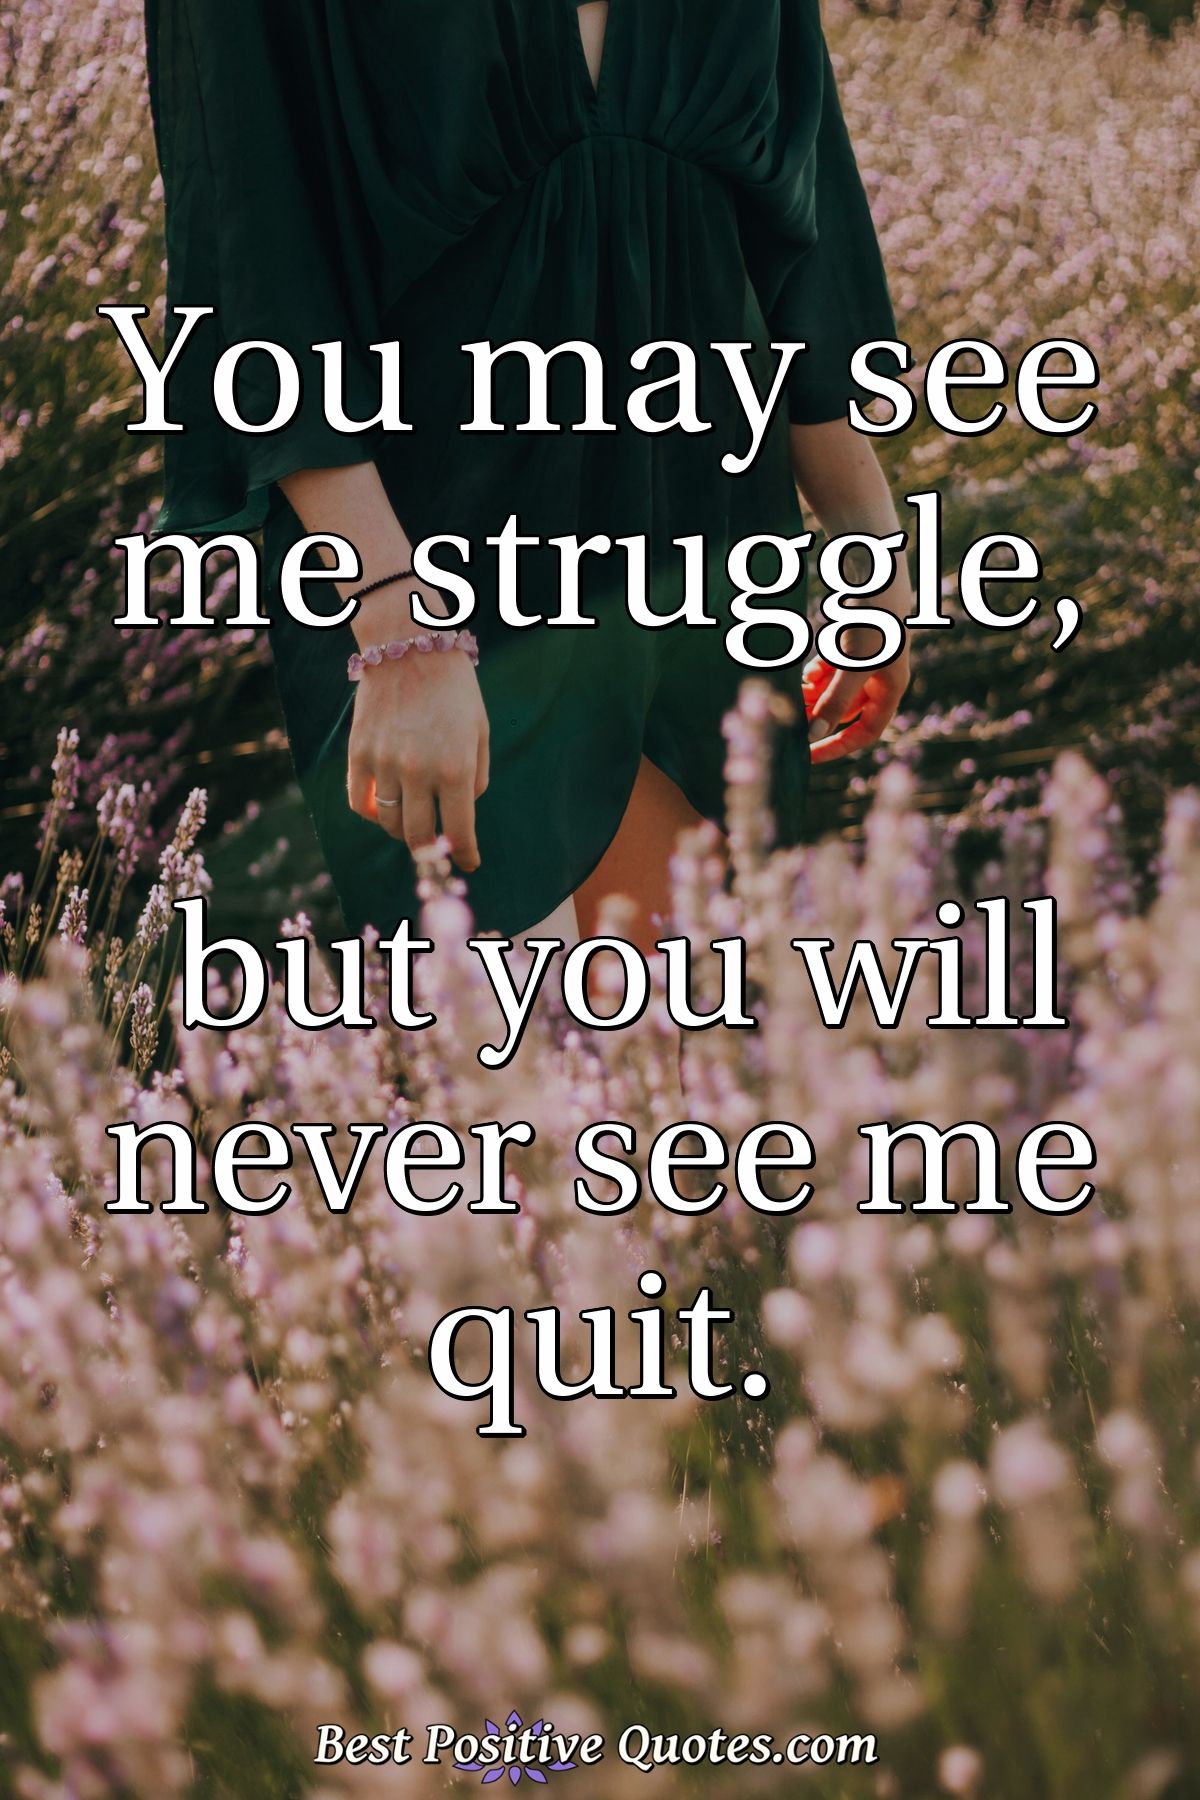 You may see me struggle, but you will never see me quit. - Anonymous